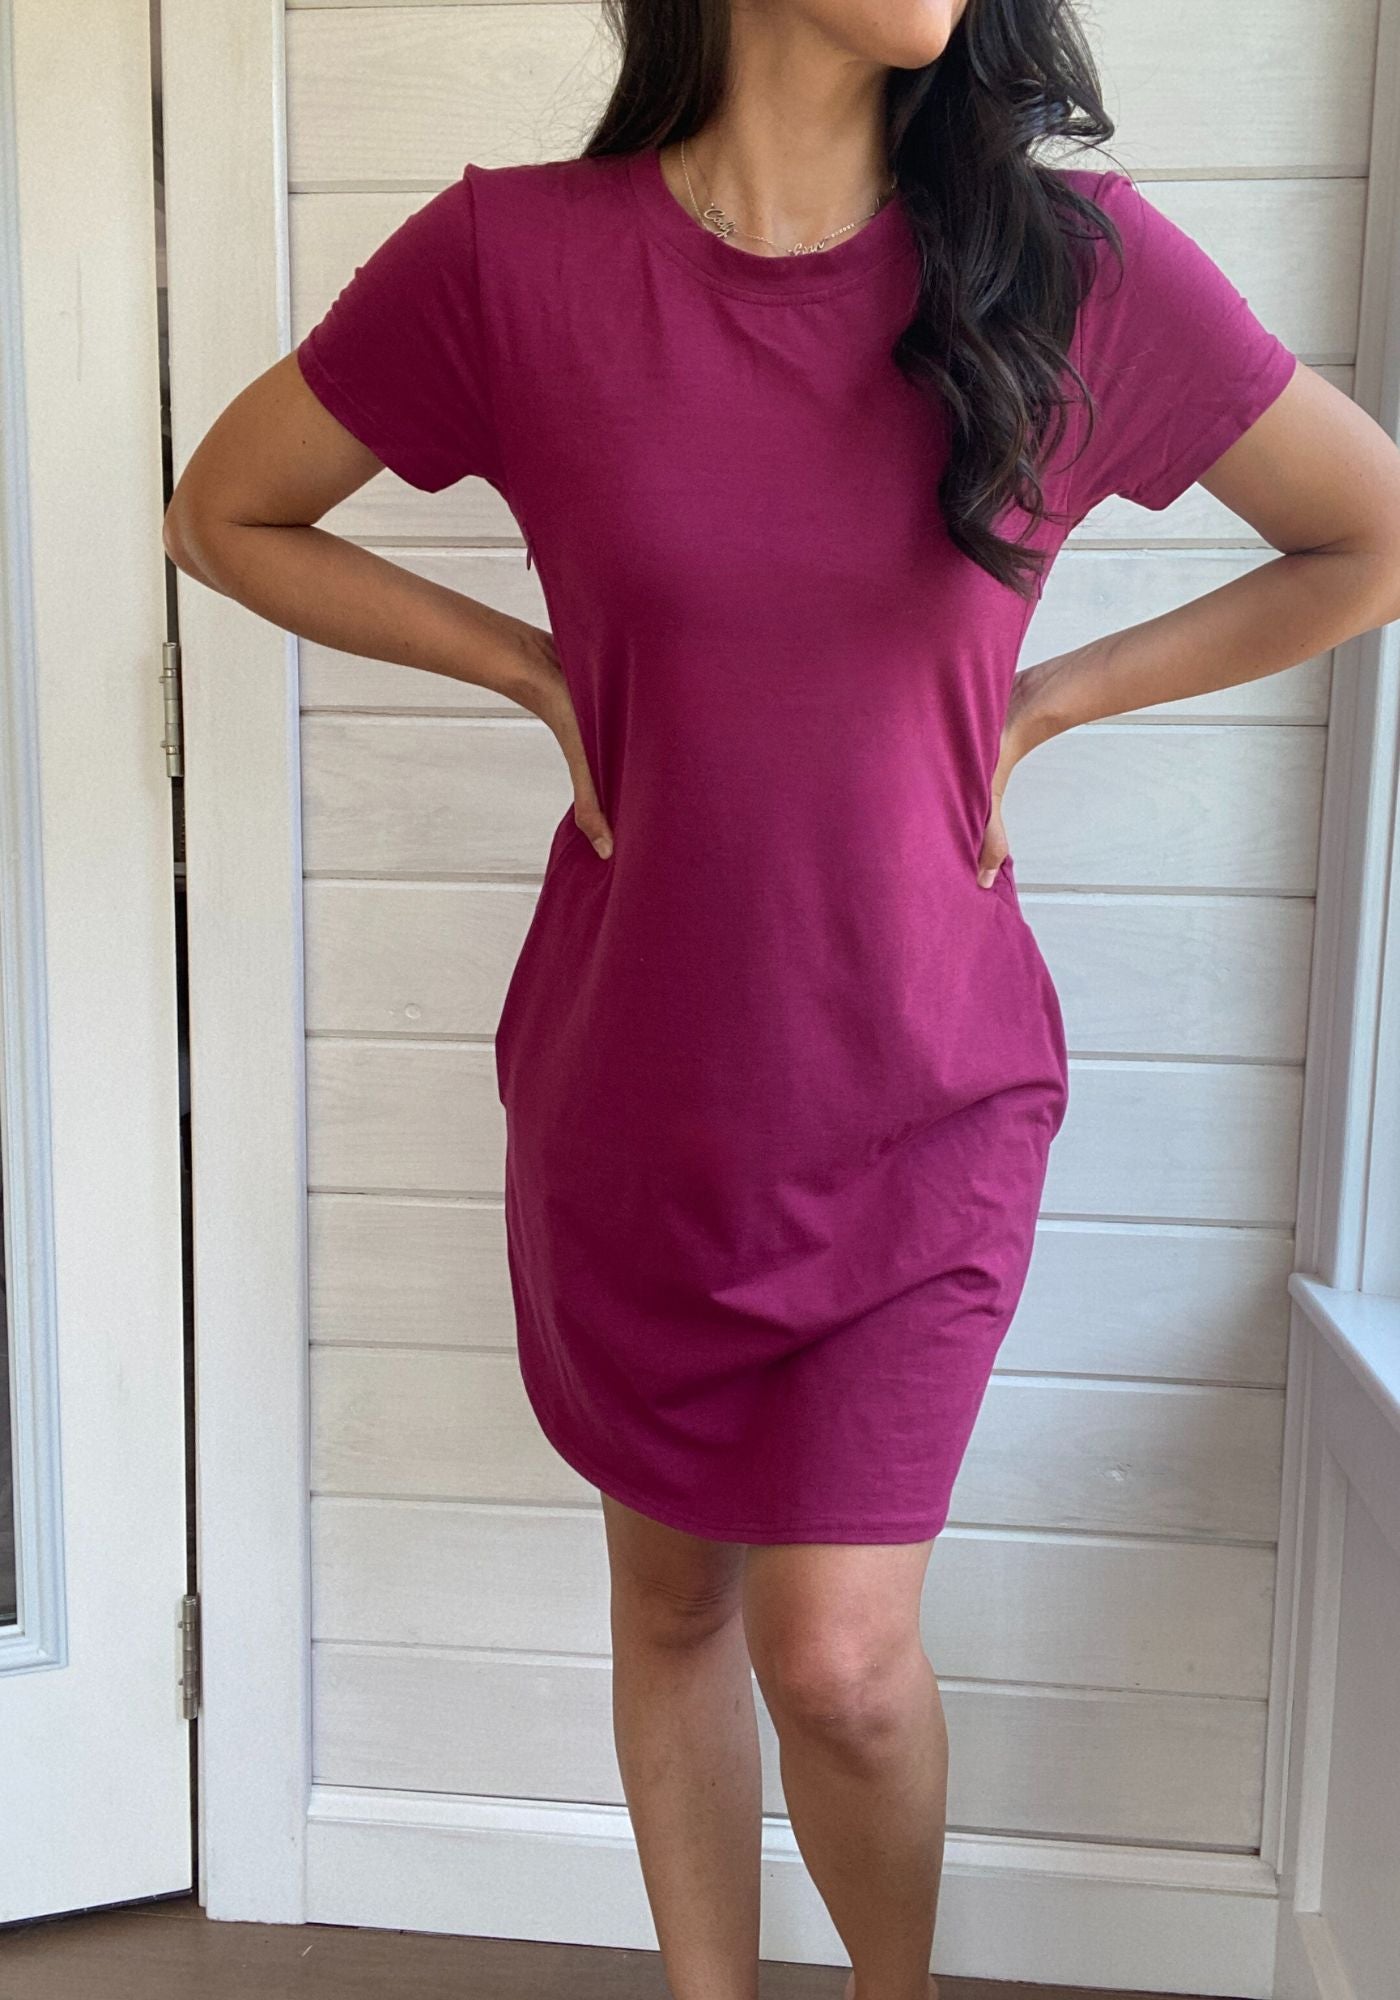 Breastfeeding T-Shirt Dress in dark pink. Two Zippers on right and left side to provide accessibility to nursing mothers. Pockets, rounded hem with two small slits on either side. T-Shirt Style dress perfect to nurse your child in.